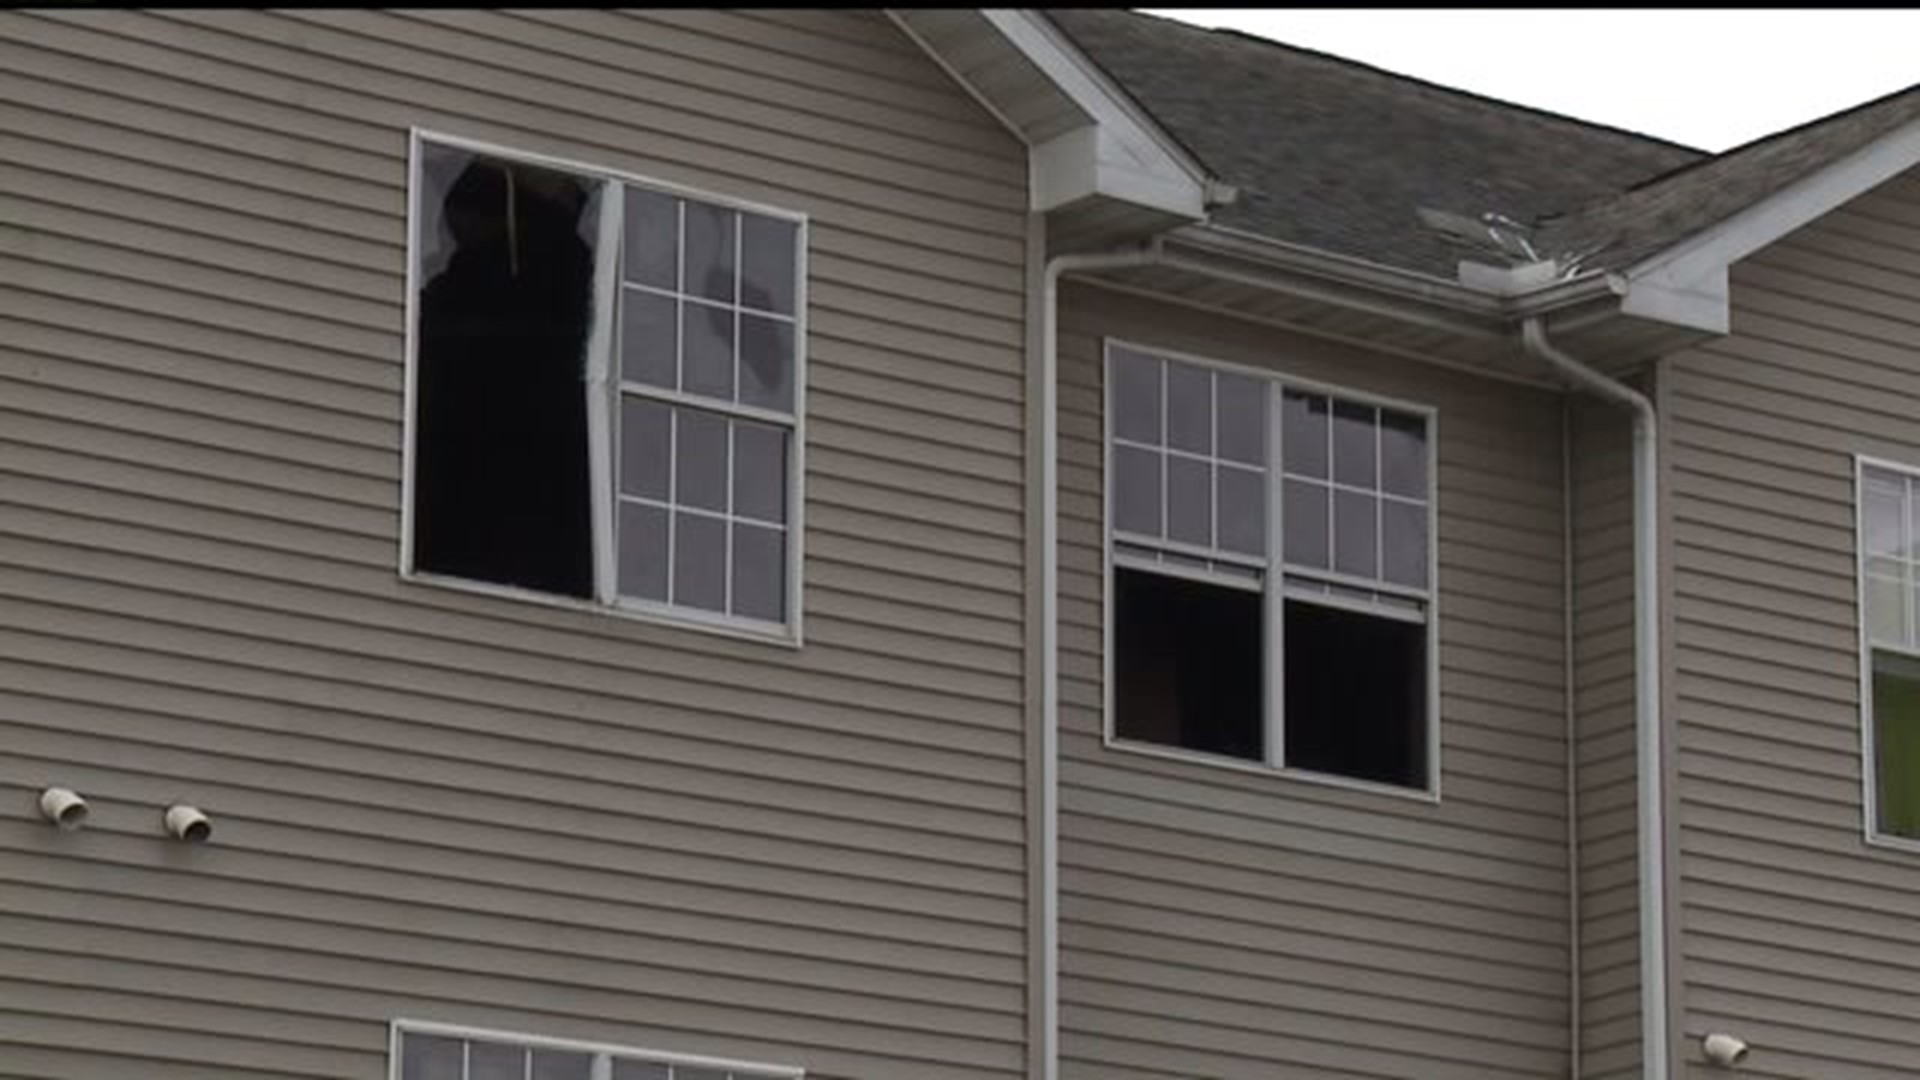 Families displaced after Kewanee apartment fire